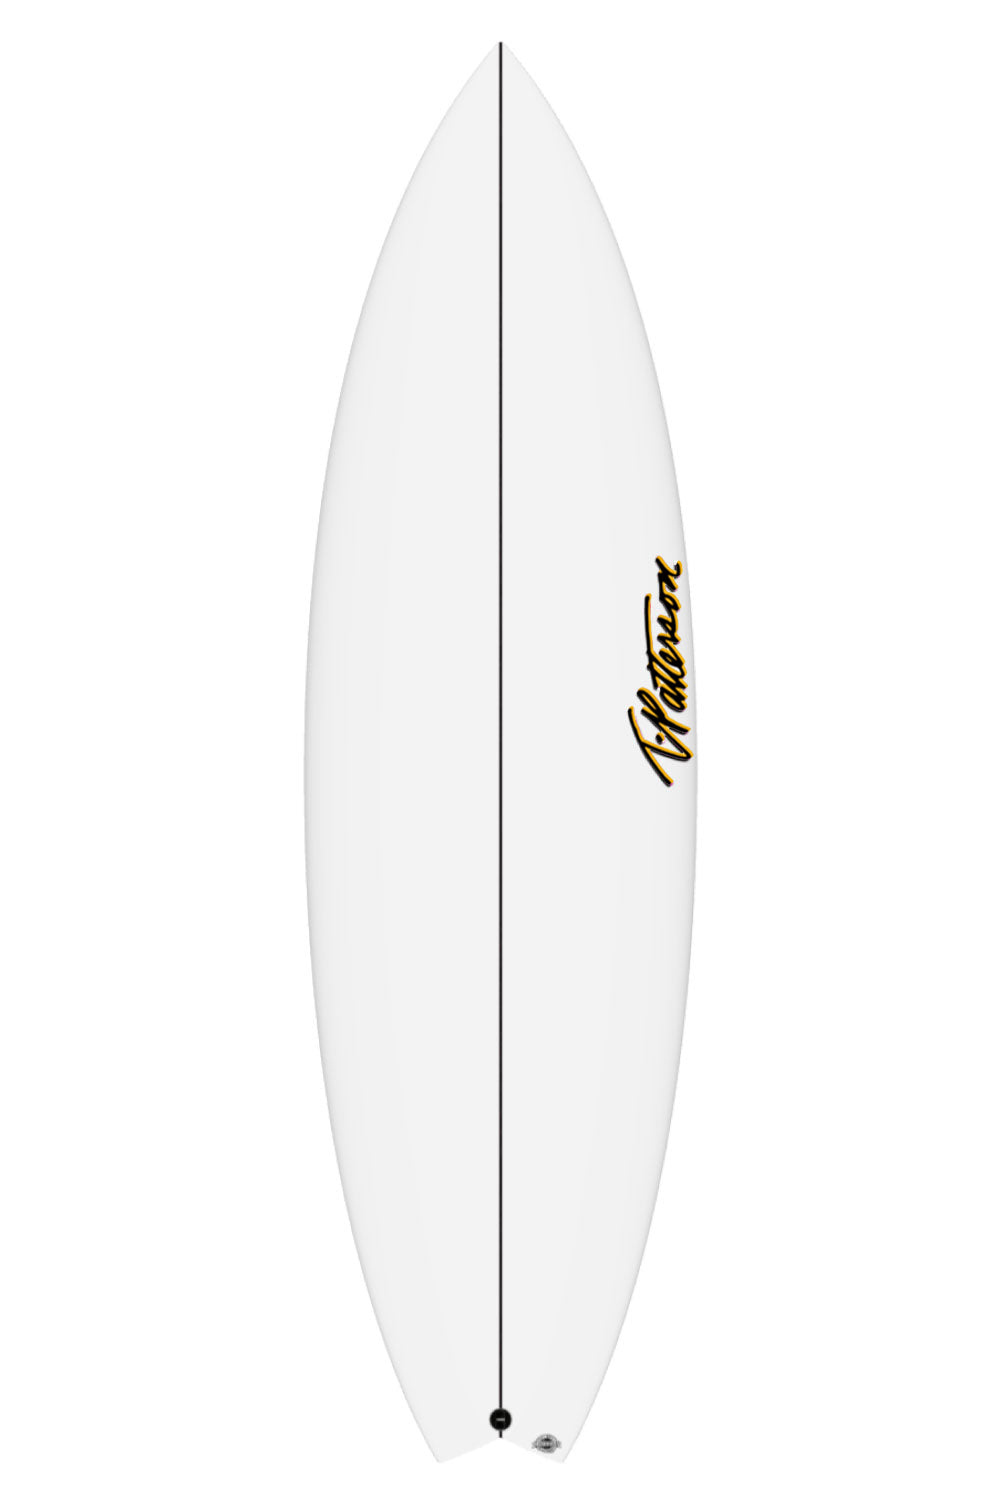 Timmy Patterson Gas Pedal Surfboard